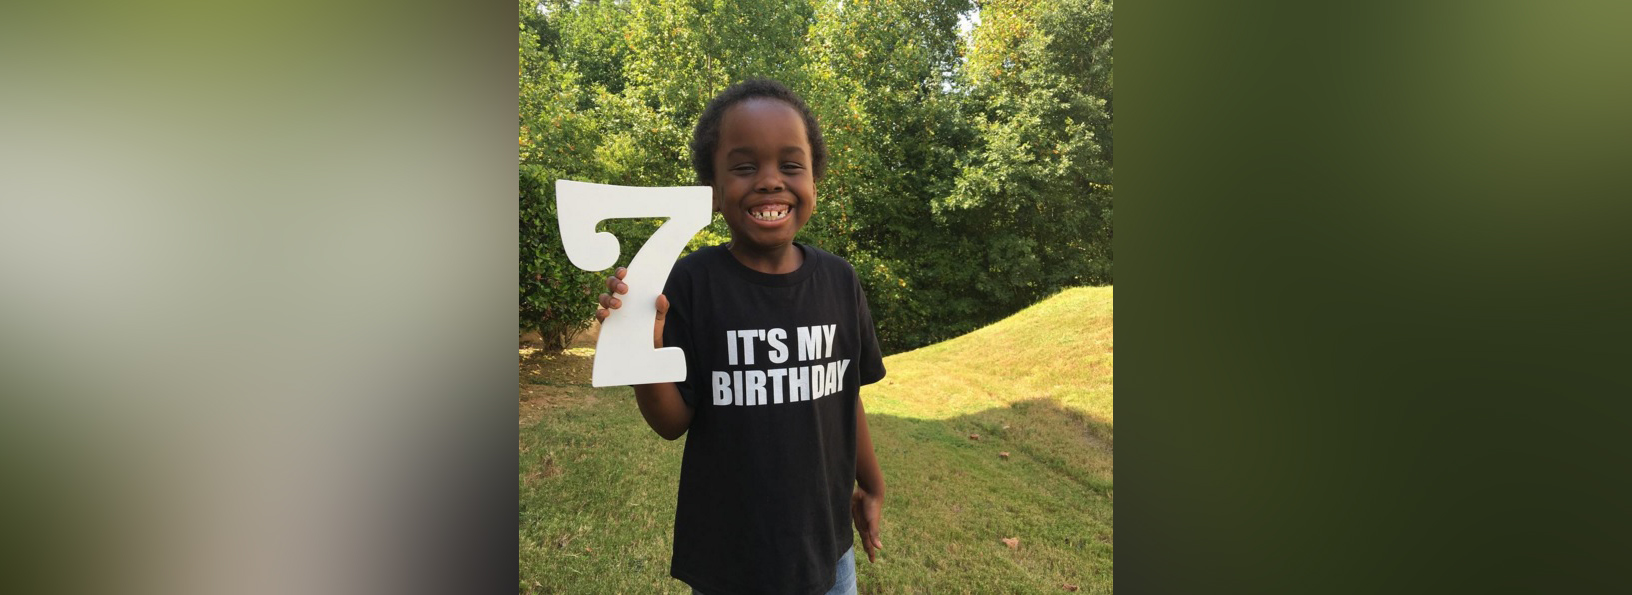 PHOTO: Kyle James, 7, of Conyers, Georgia was cured of sickle cell disease after his sister Kendall donated bone marrow.